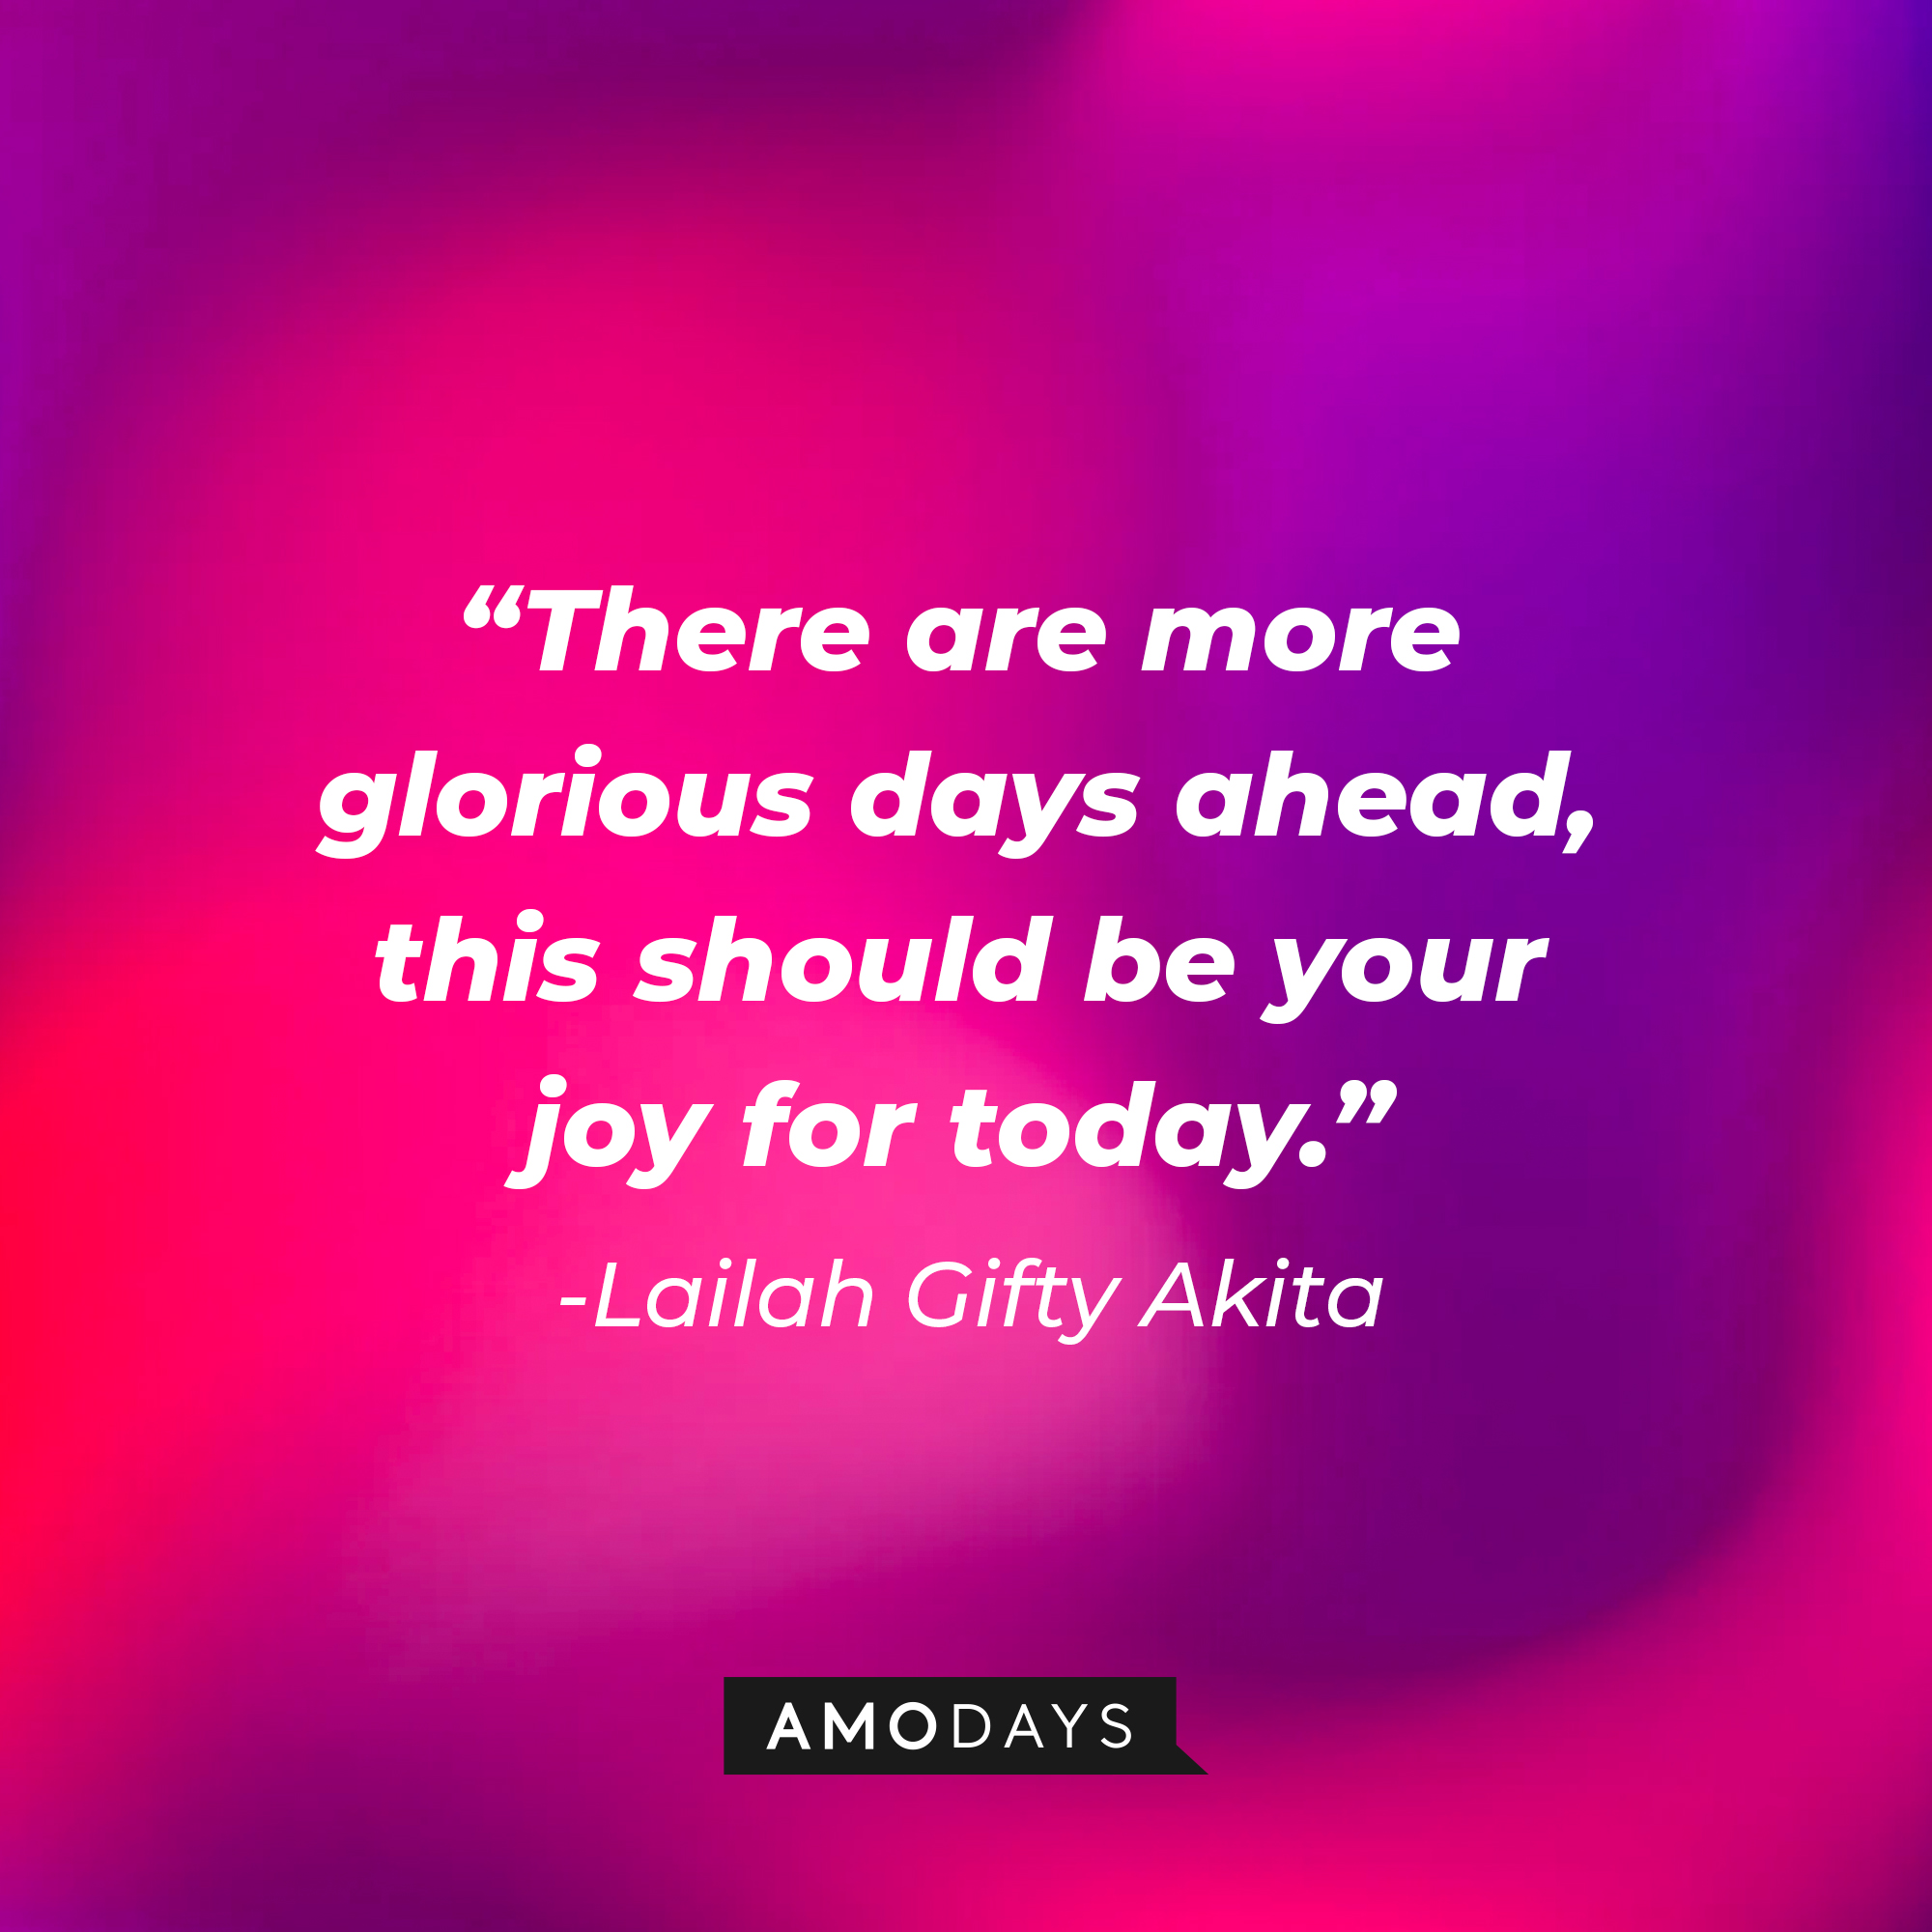 Lailah Gifty Akita's quote: "There are more glorious days ahead, this should be your joy for today."  | Image: Amodays